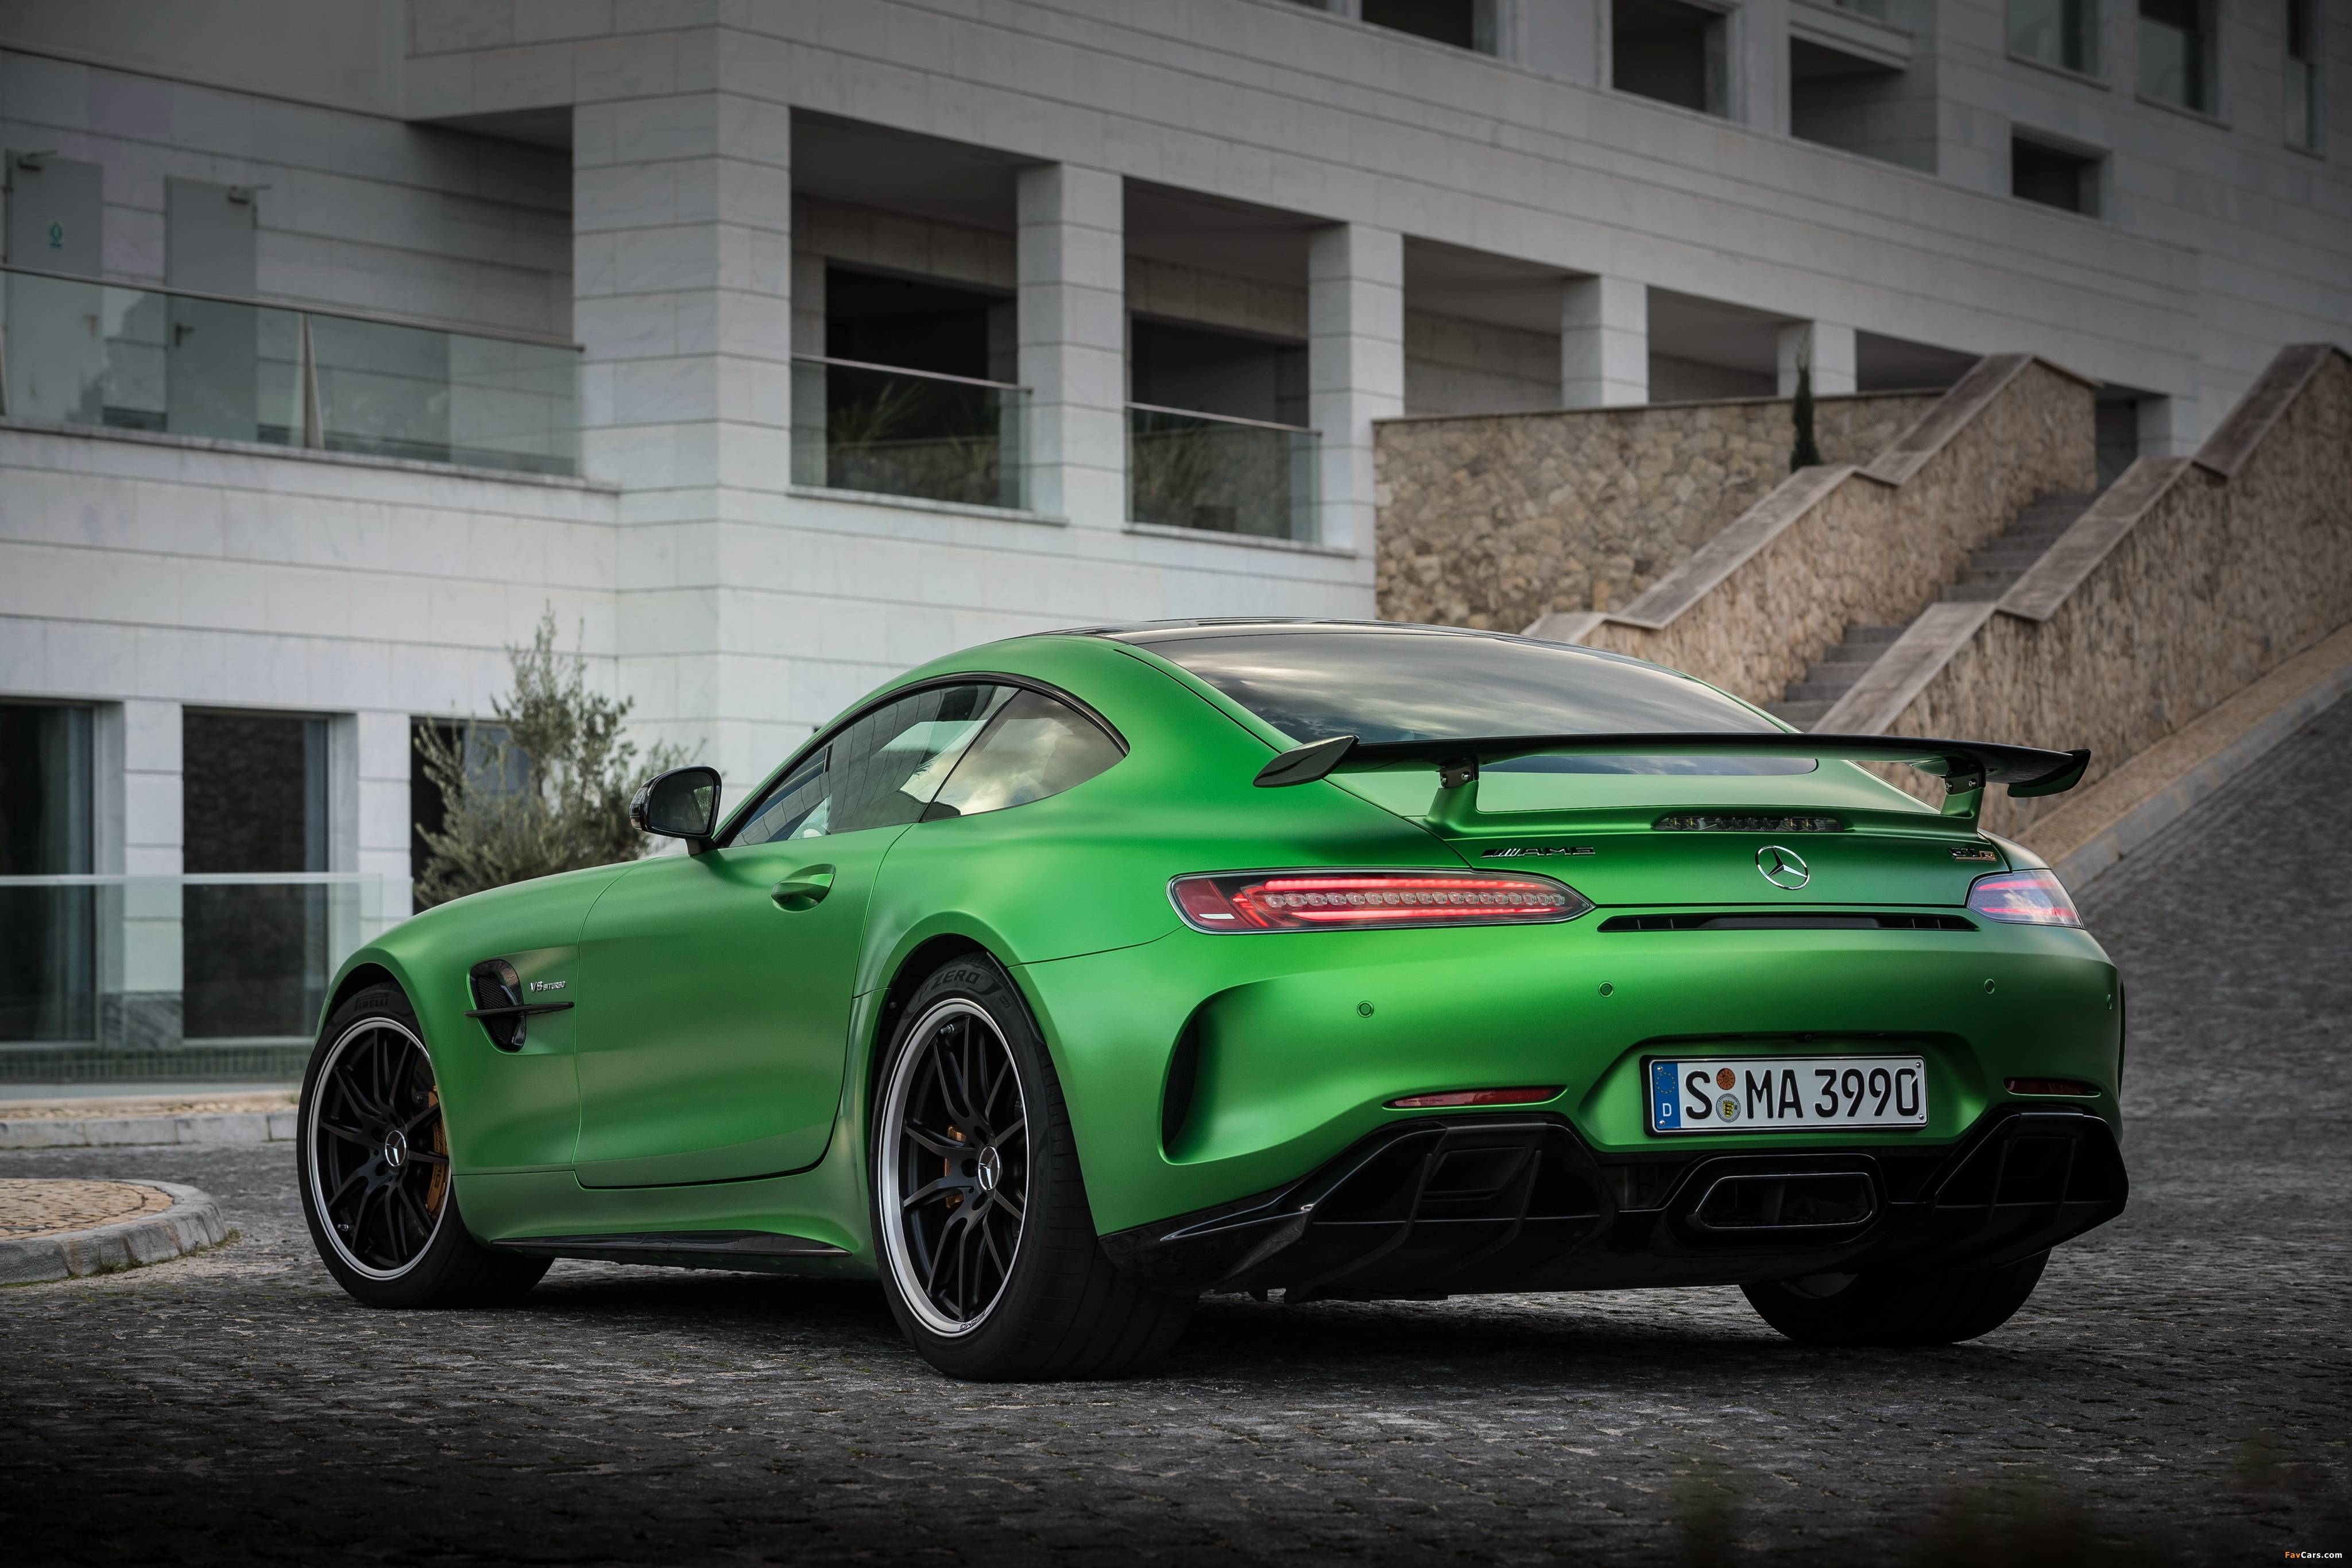 Mercedes-AMG GT R (C190) 2016 pictures (4096 x 2731)